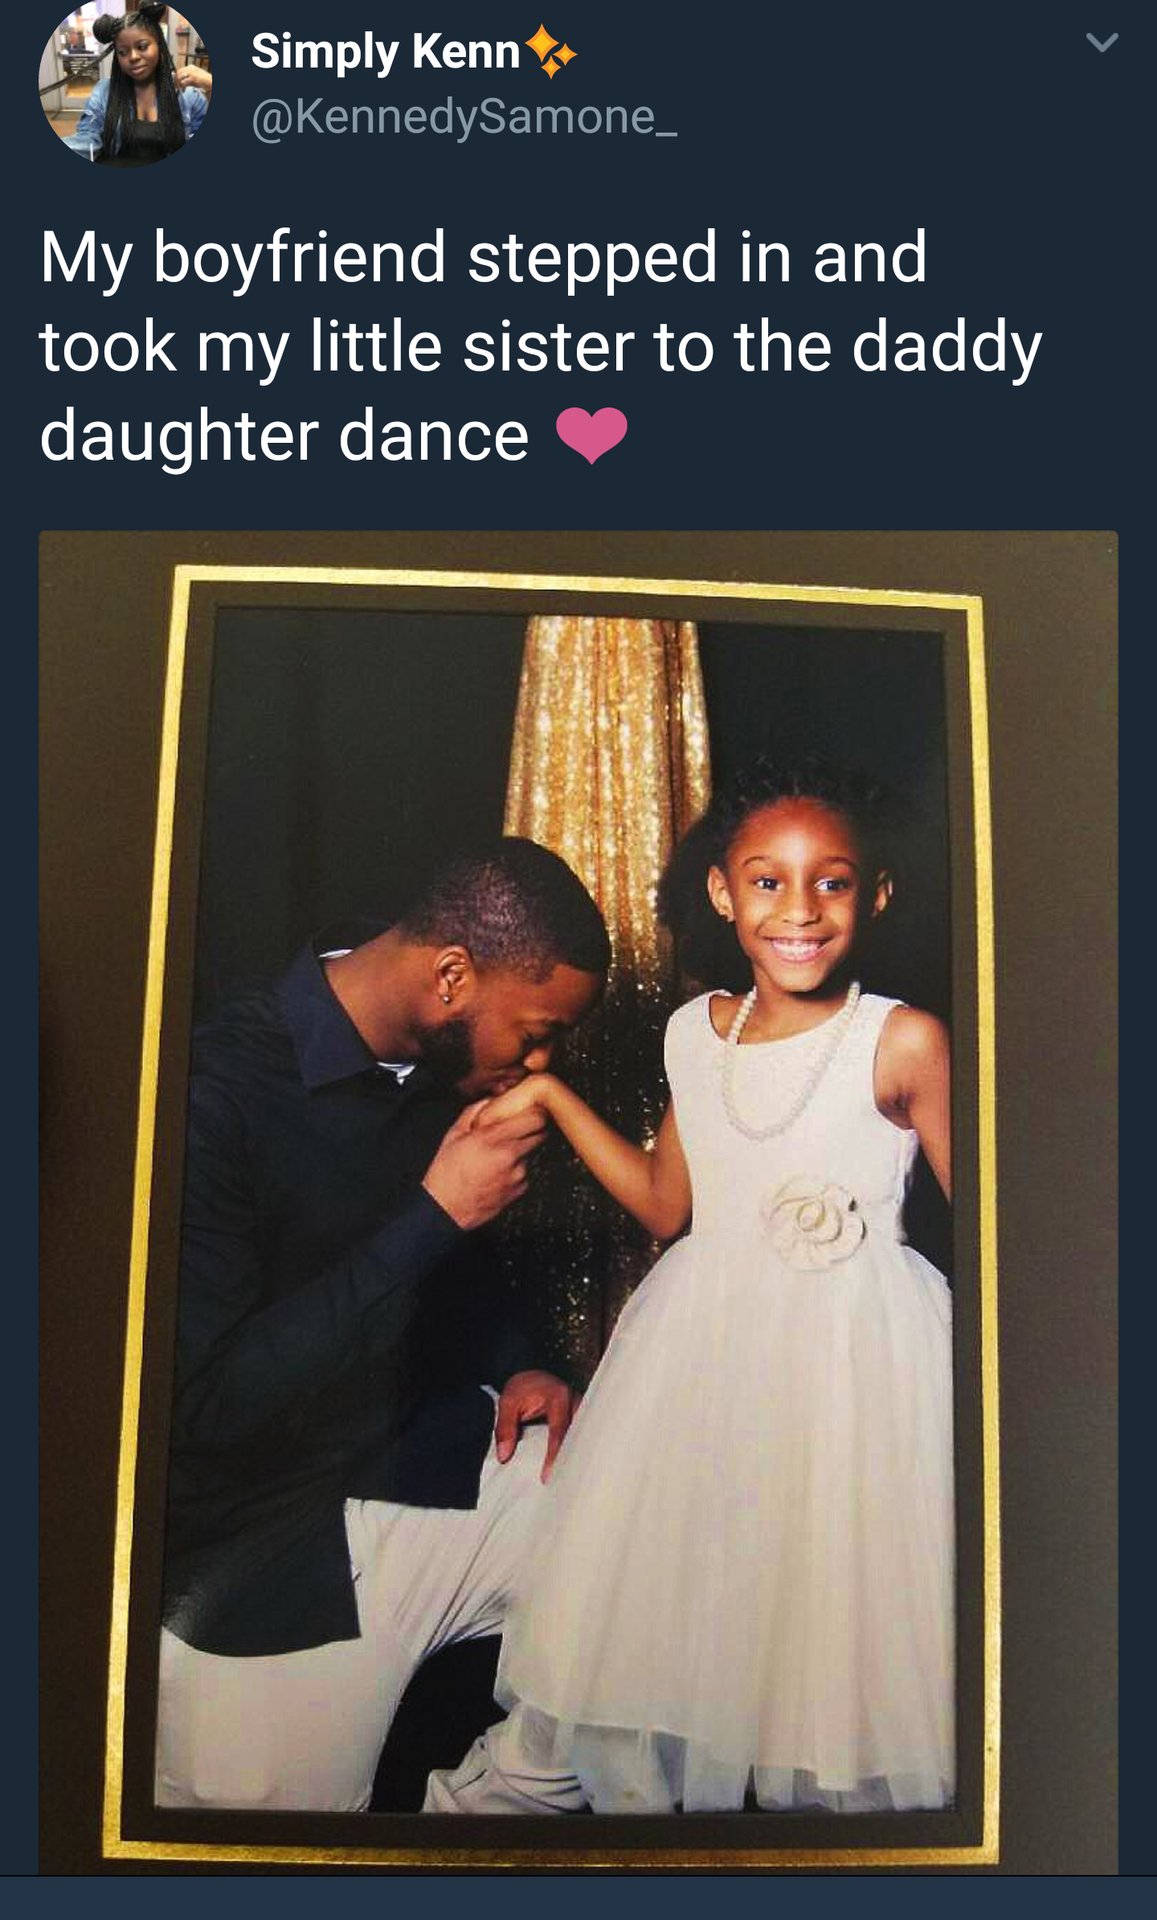 boyfriend and little sister memes - Simply Kenn My boyfriend stepped in and took my little sister to the daddy daughter dance